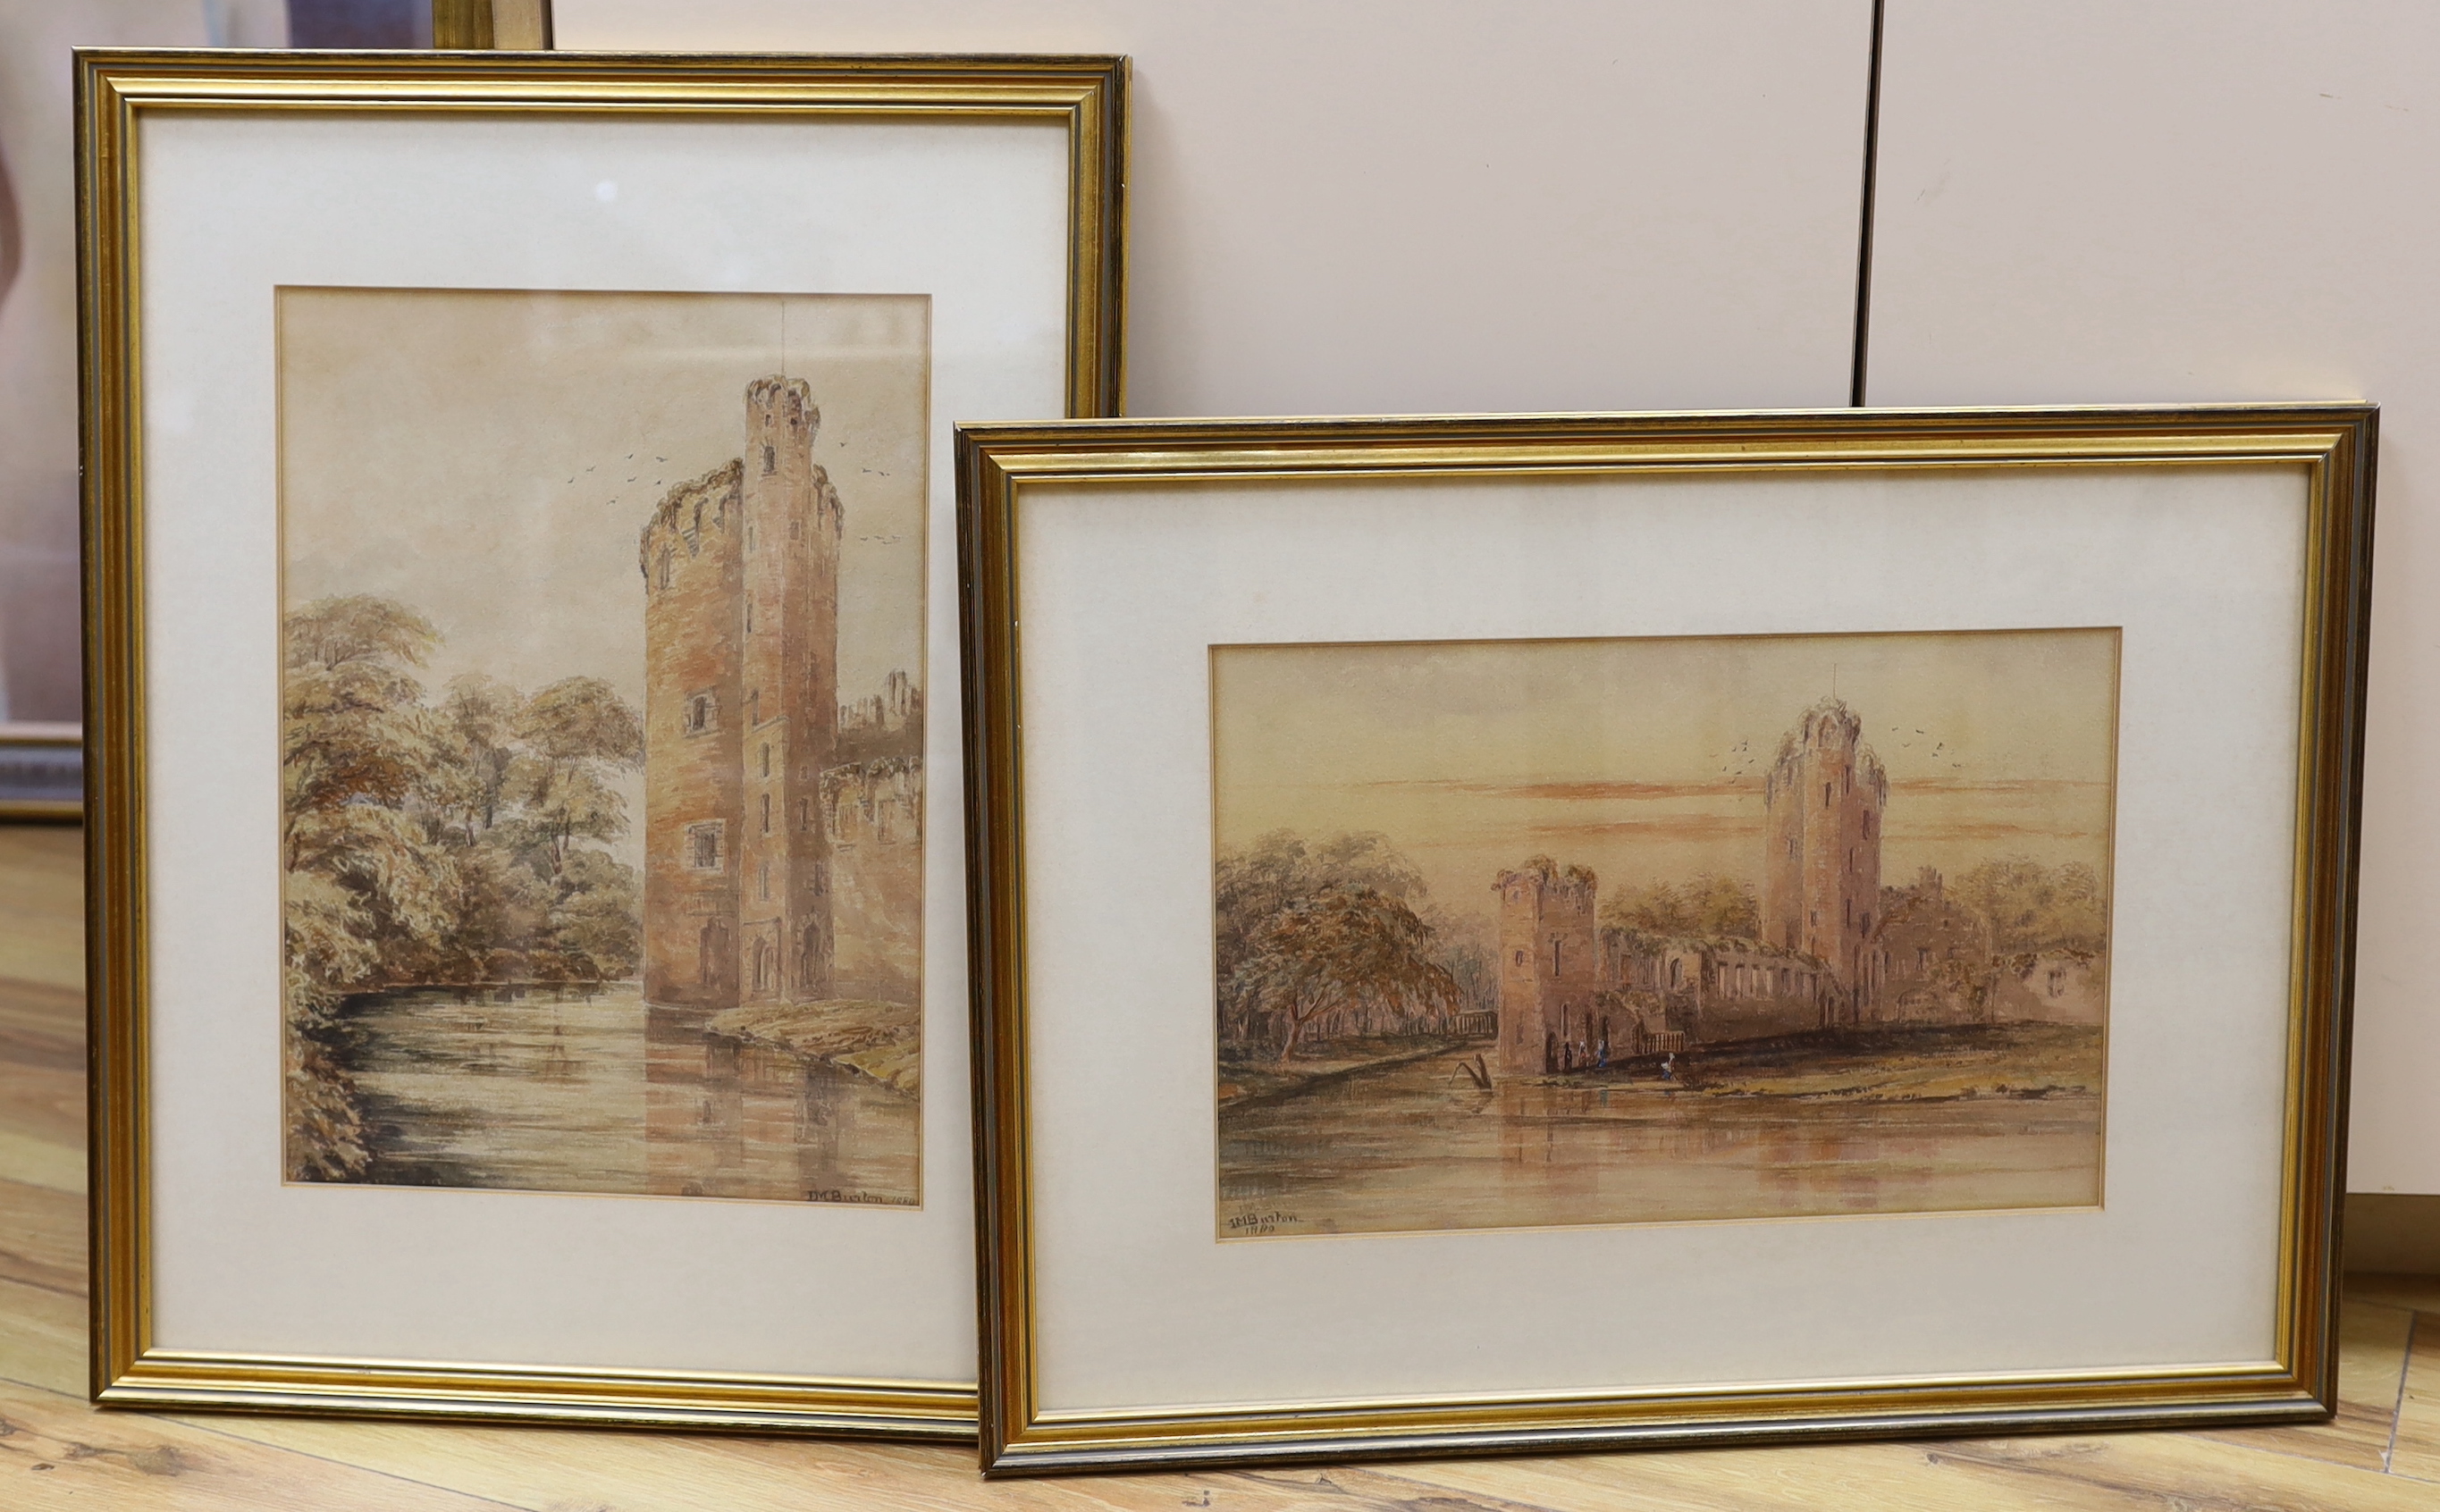 J.M. Burton (19th century), two watercolours, 'Ruined castle' and 'Abbey', signed and dated 1880, 34